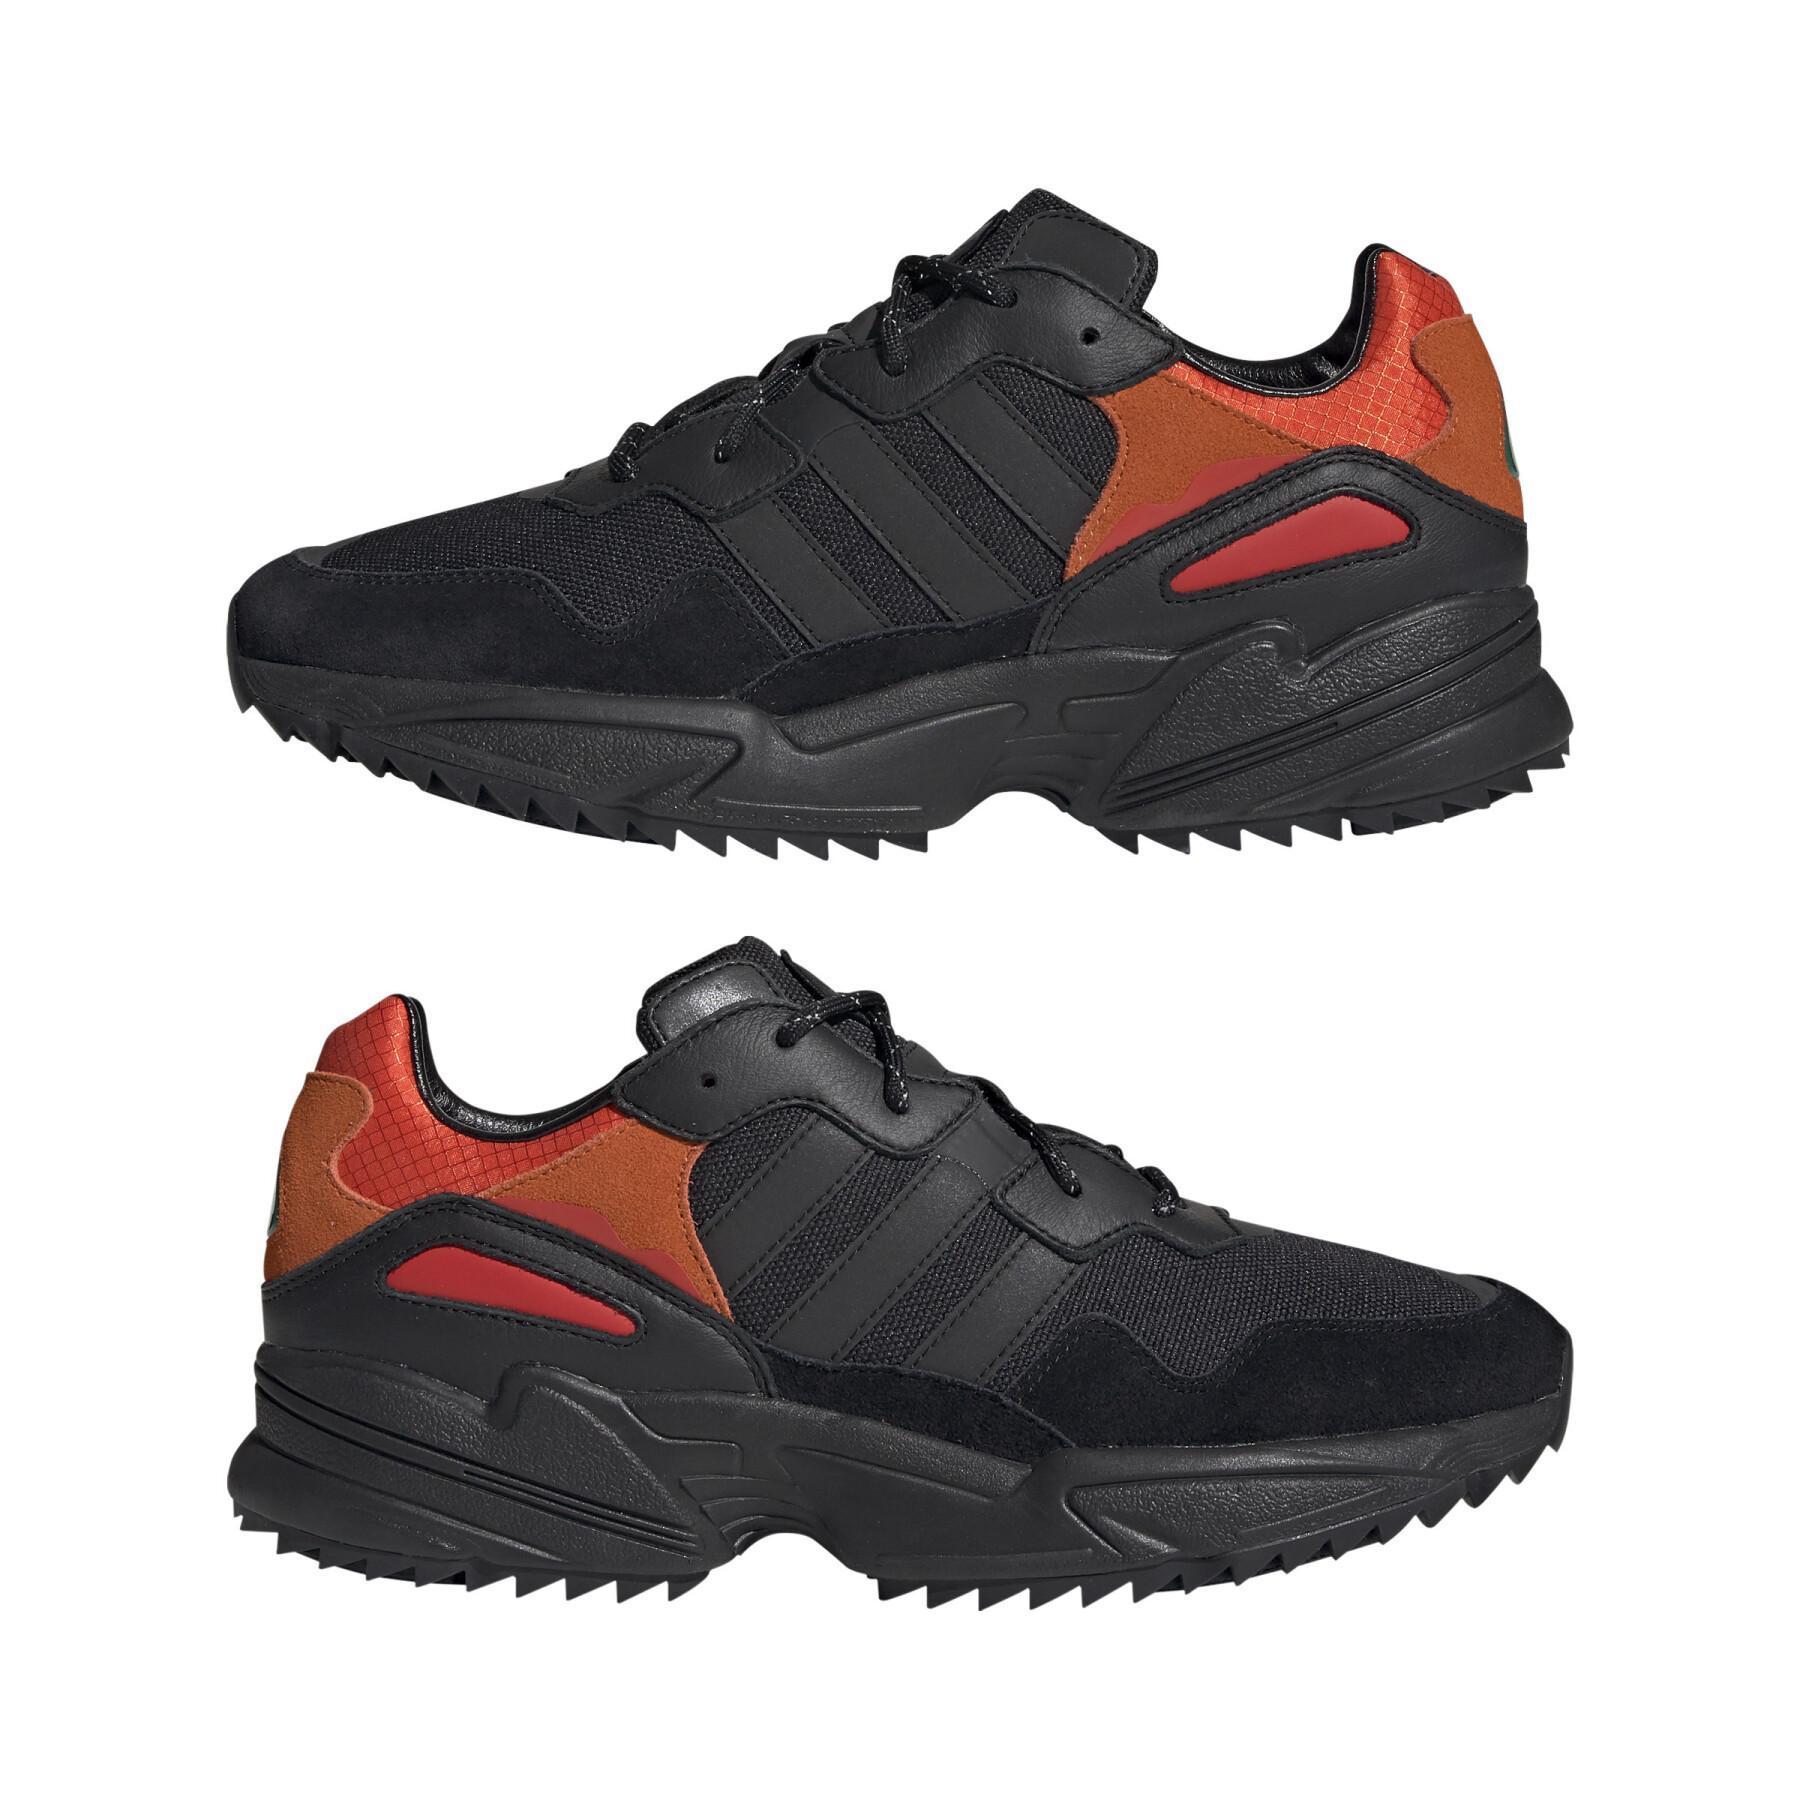 adidas Yung-96 Trail Sneakers